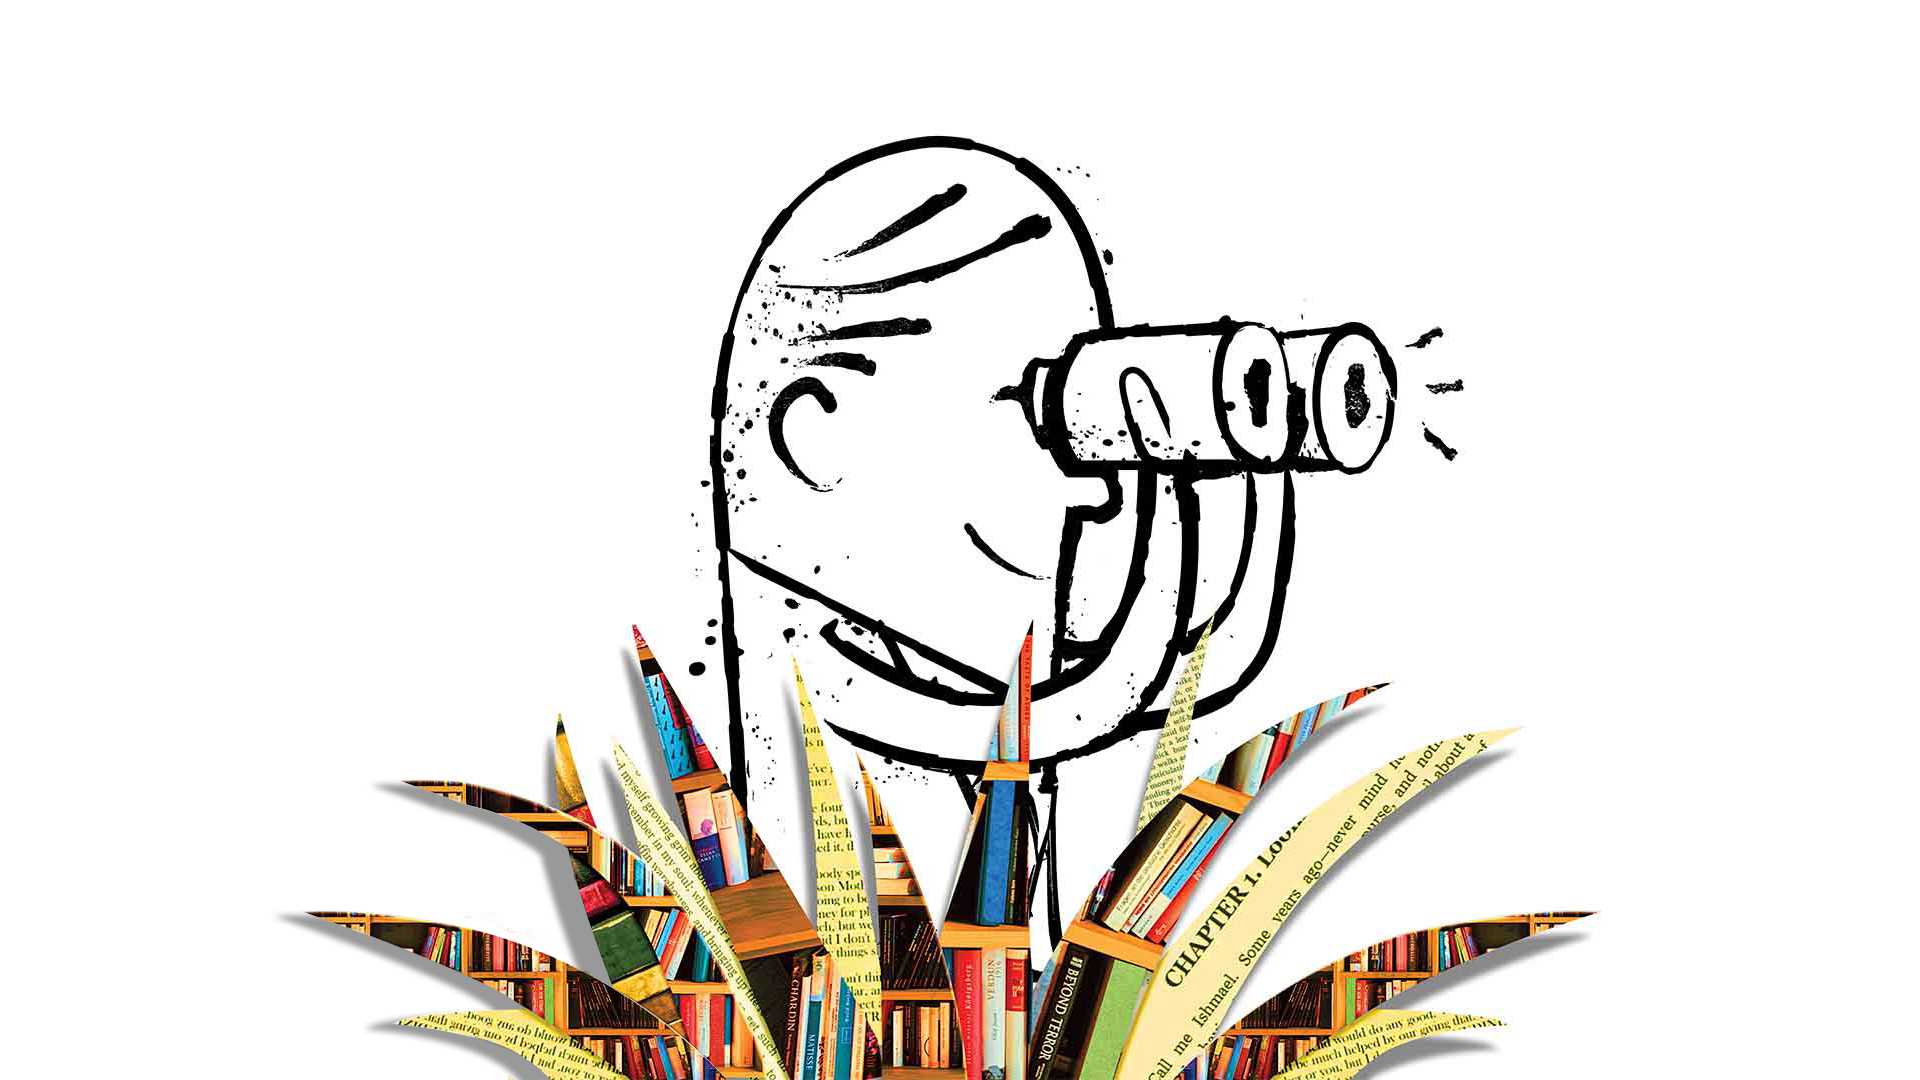 Illustration of man looking through binoculars in high grass that resembles book clippings.